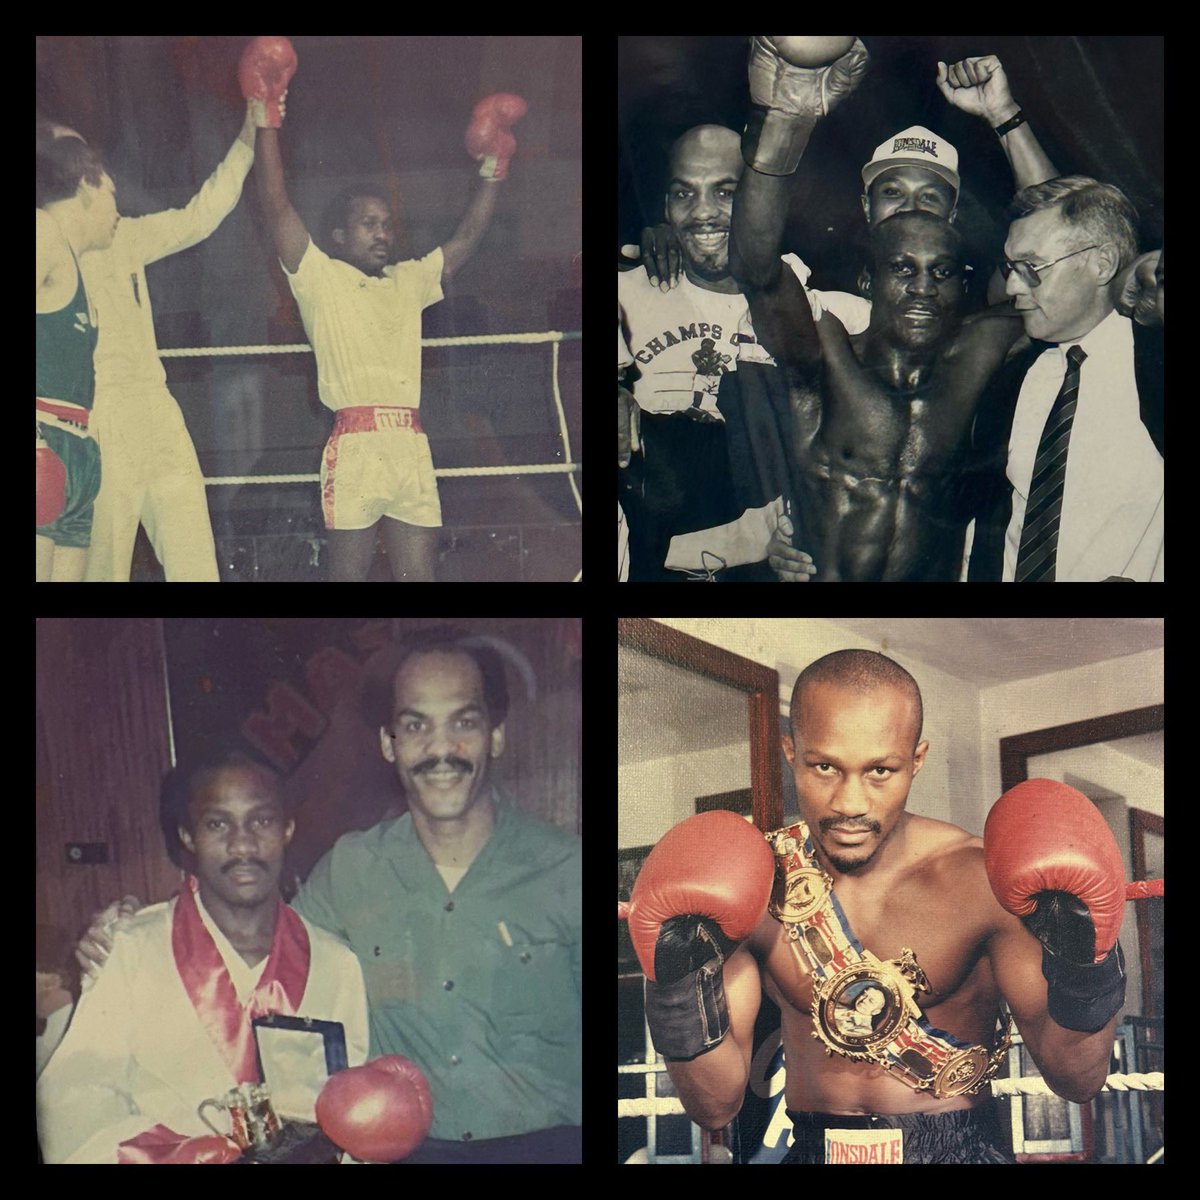 Such sad news hear the passing of British & Commonwealth Super Lightweight Champion Tony Ekubia . Tony a gentleman & fighter out of Phil Martins Moss Side ABC & Champs Camp will be missed . An original day one Champion . Thoughts & prayers to his family at this sad time 🙏🏿